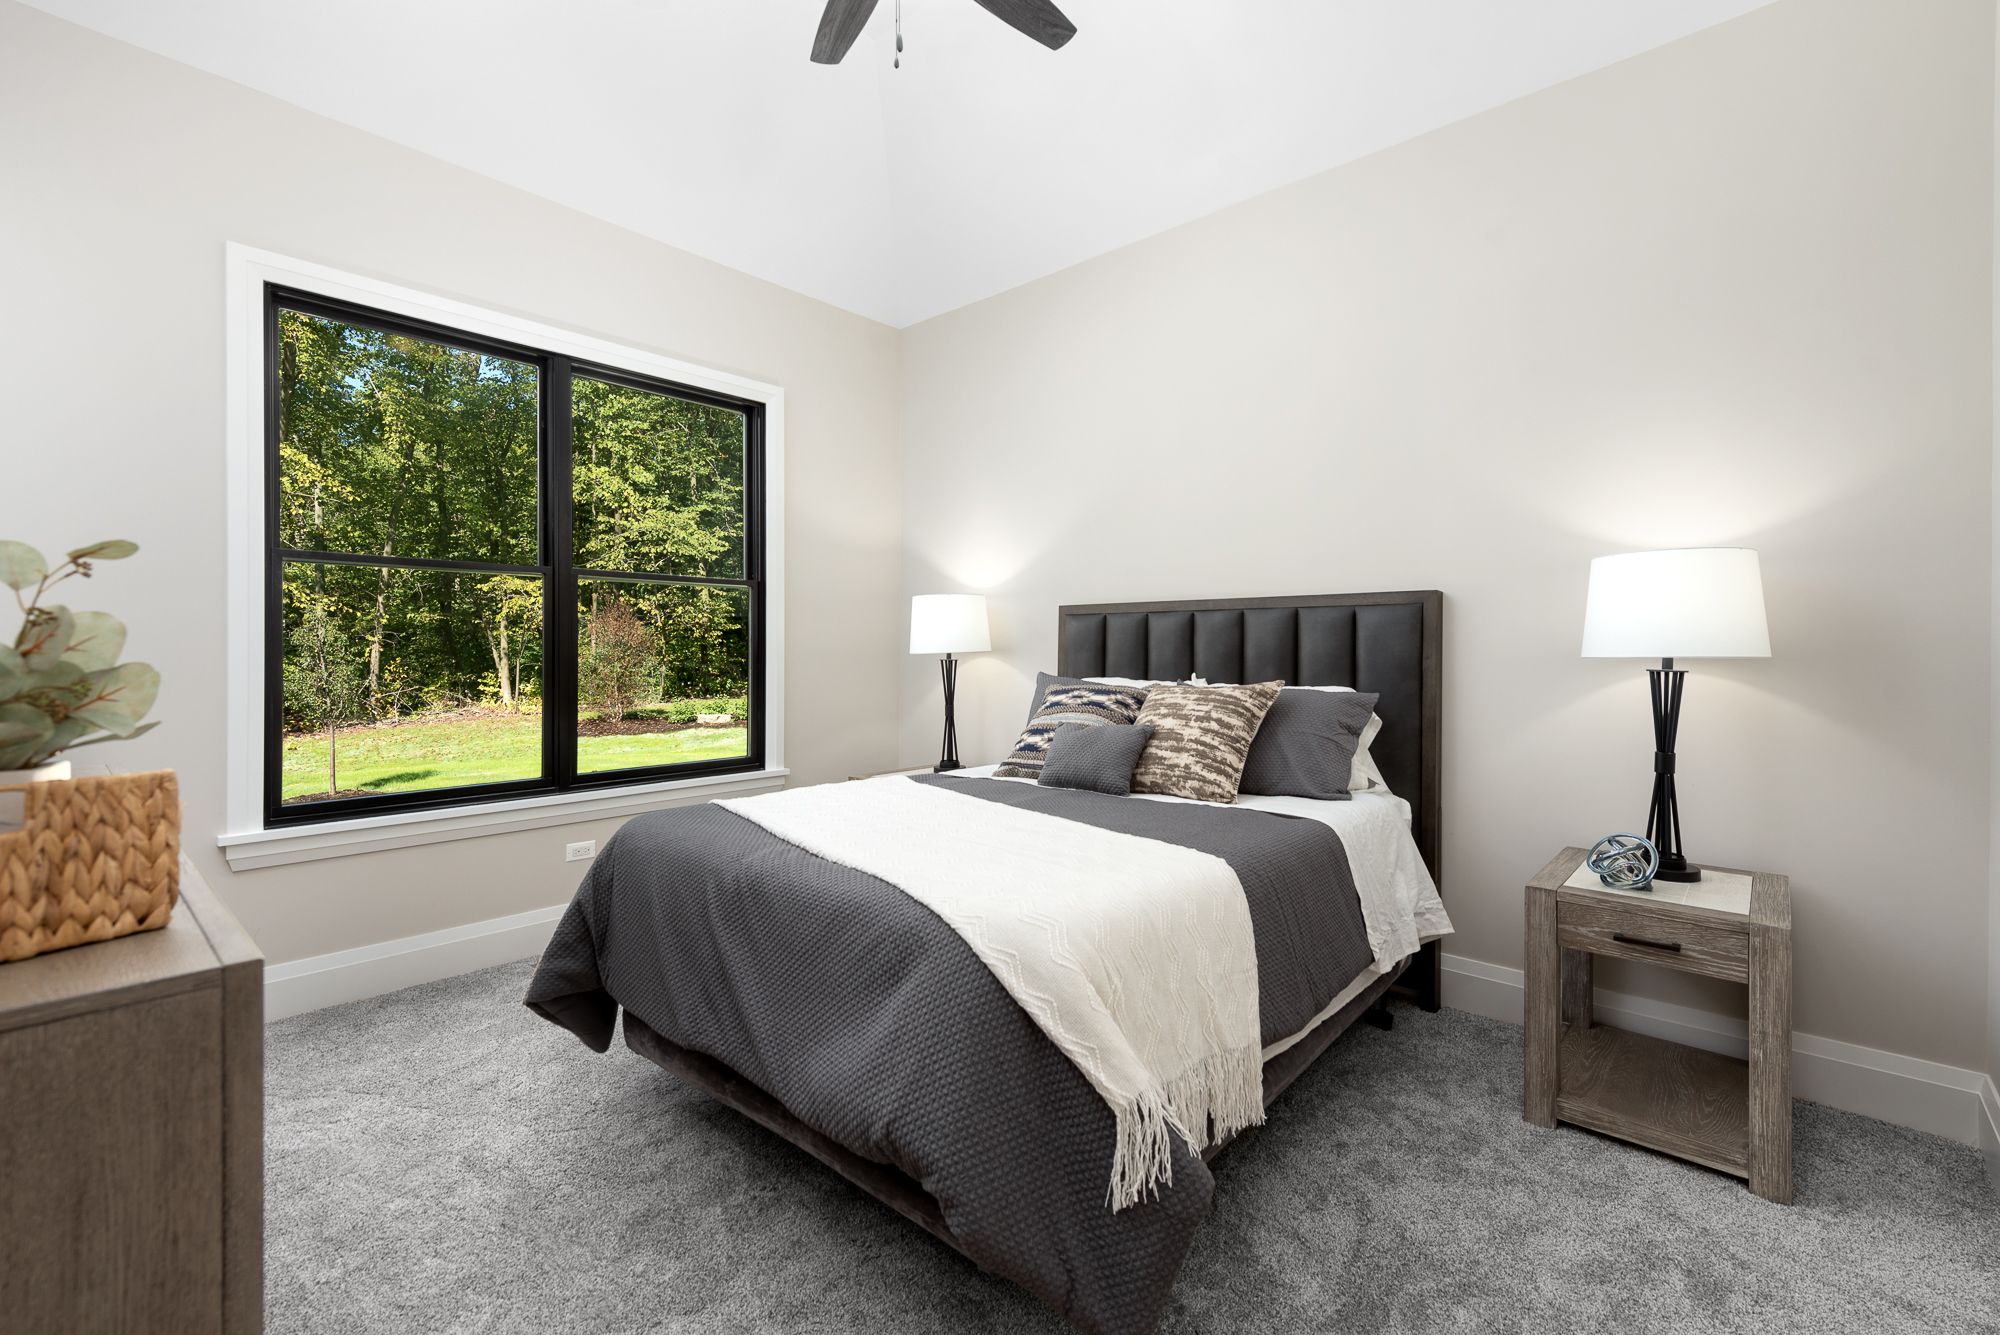 Guest bedroom with upholstered headboard and black framed windows